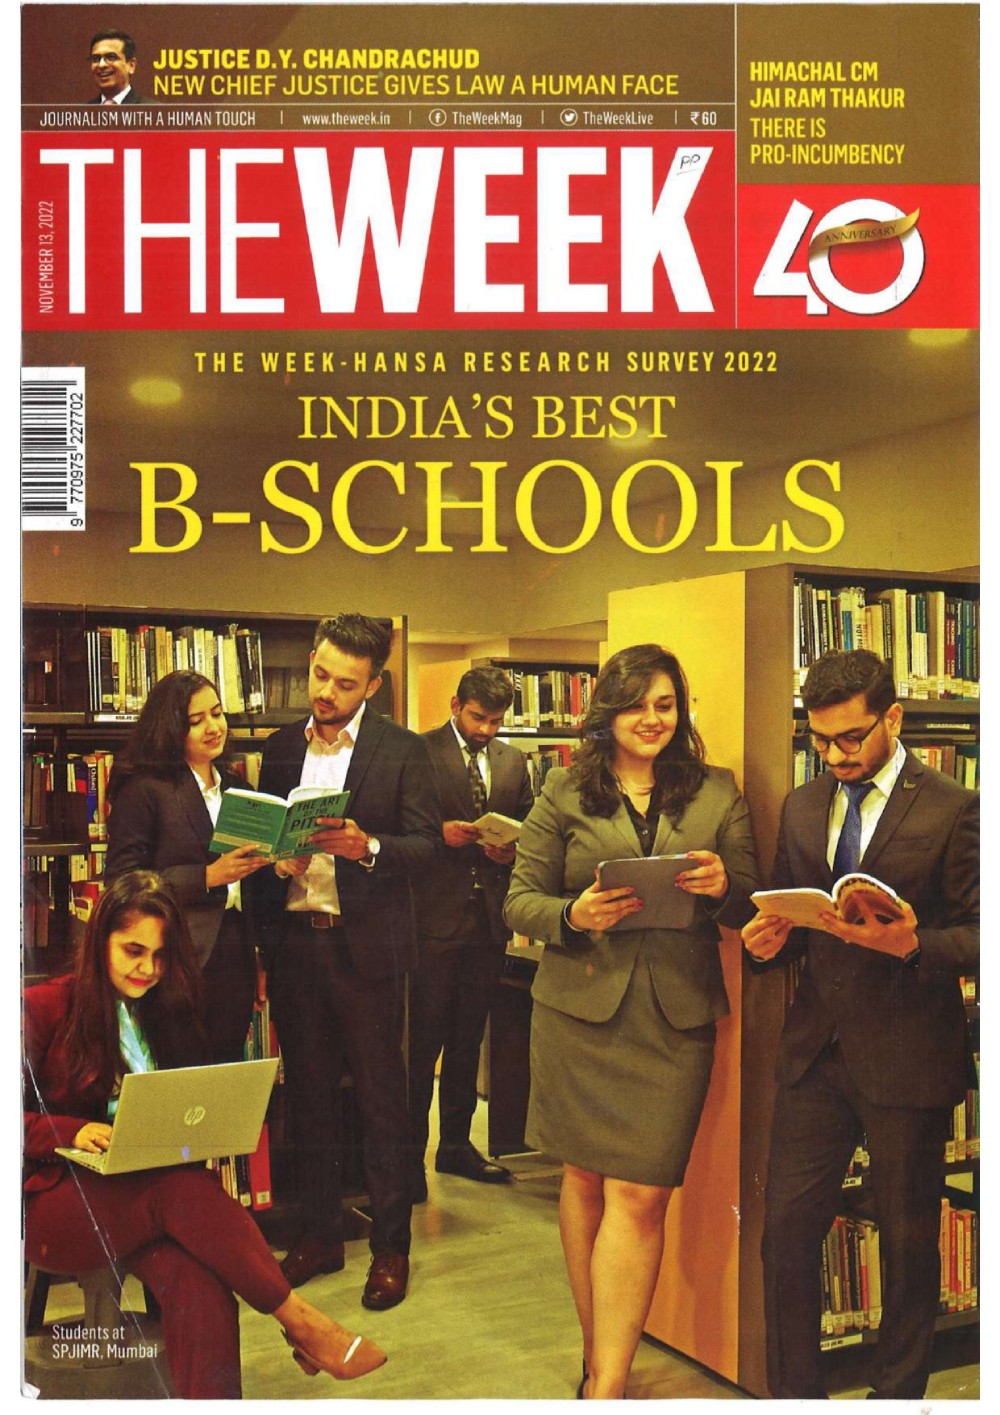 The Week - Hansa Research Survey 2022 India's Best B-Schools. November 13, 2022_page-0001